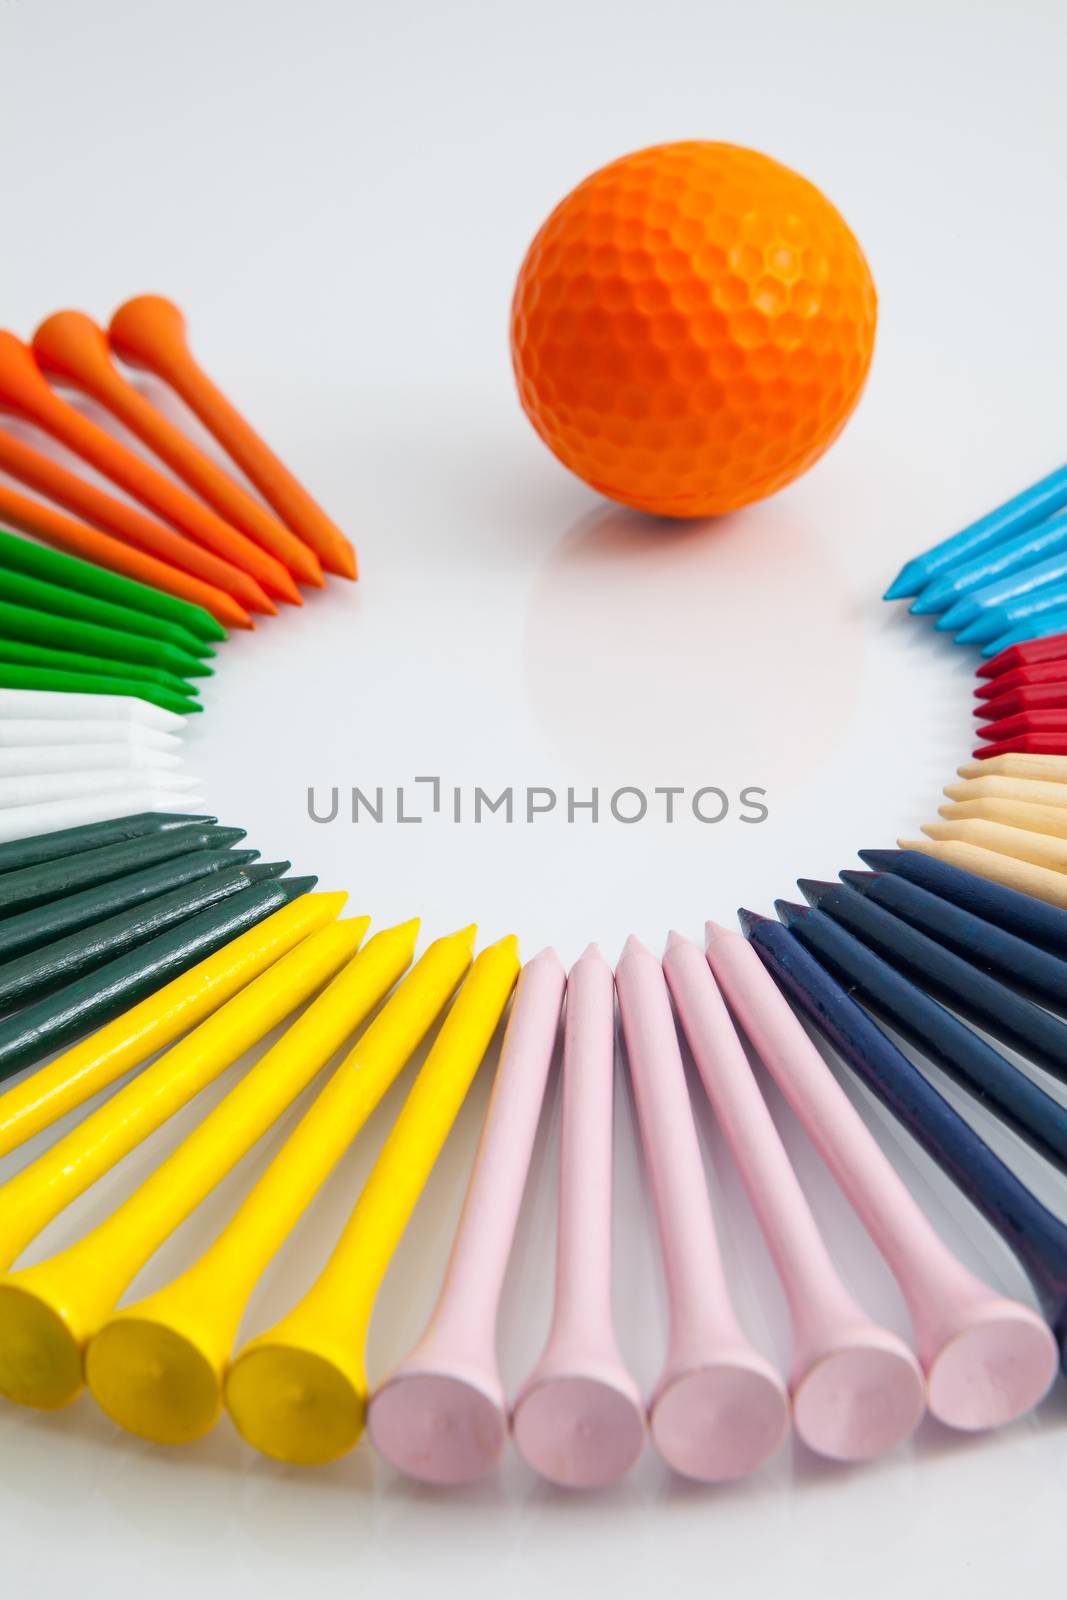 The different colorful wooden golf tees on the white background